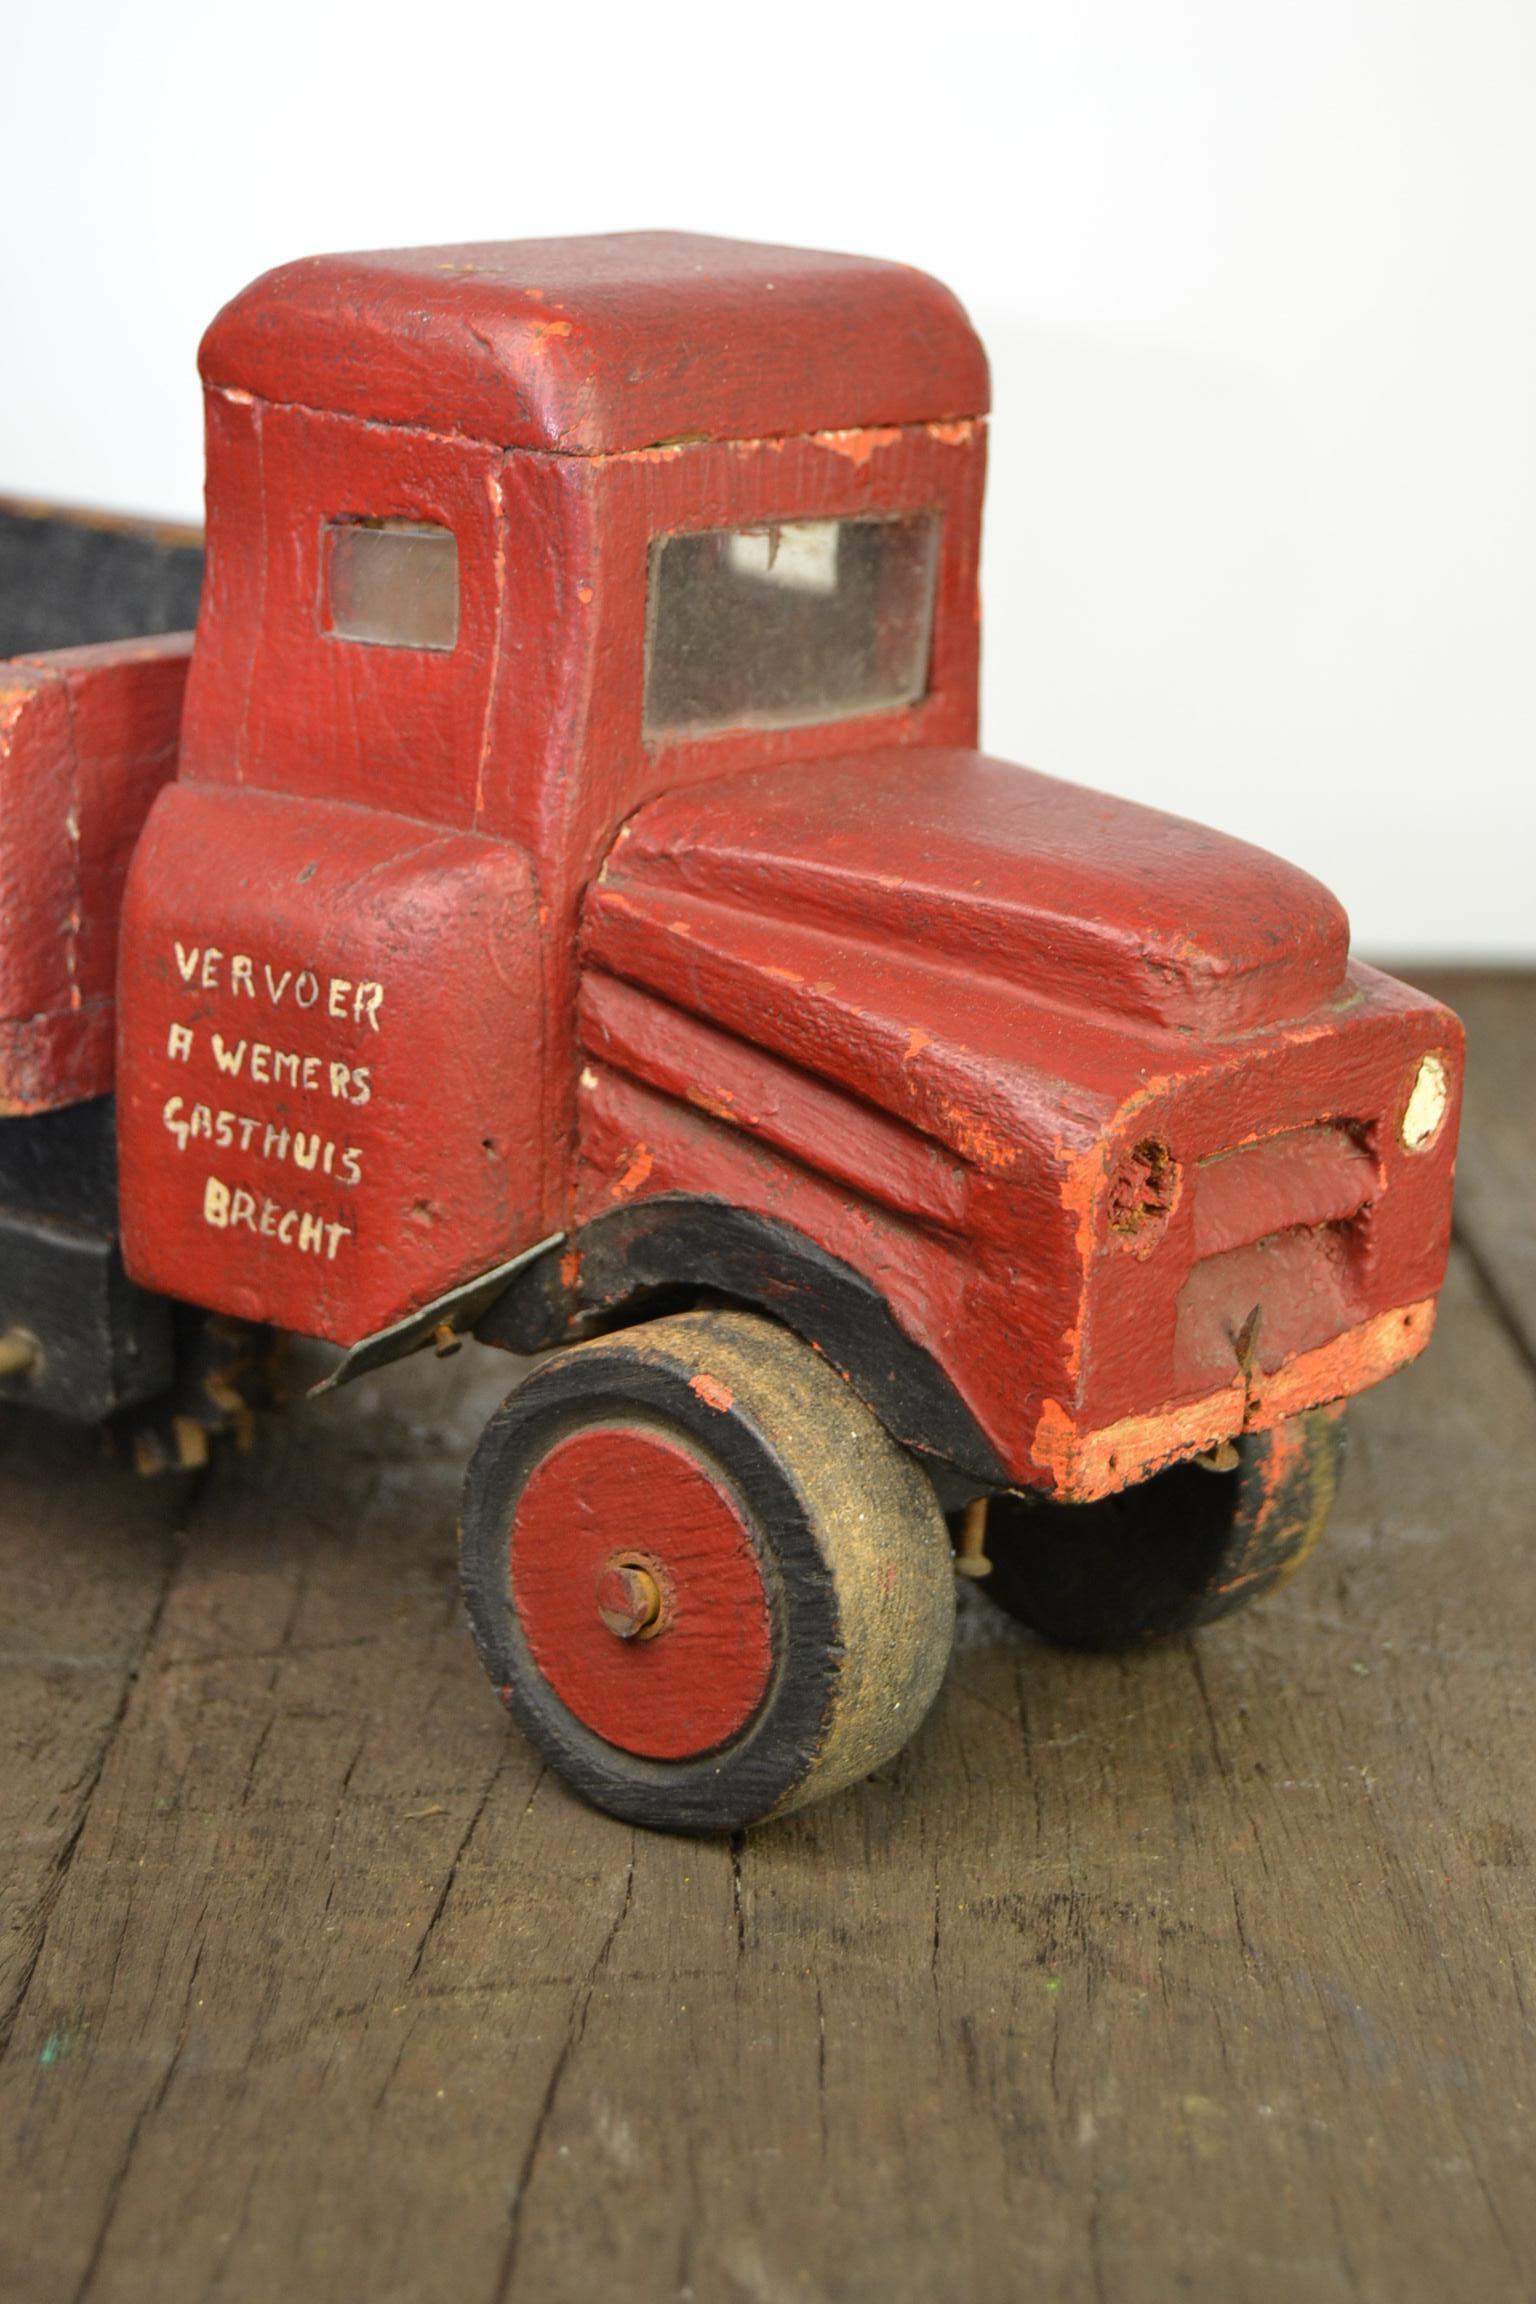 Folk Art toy truck.
This wooden toy is a dump truck, dumper truck, tipper truck.
With this art & Craft toy - model of a truck, has been played a lot,
So lots of traces due use and age.
This used and aged patina makes this decorative object just